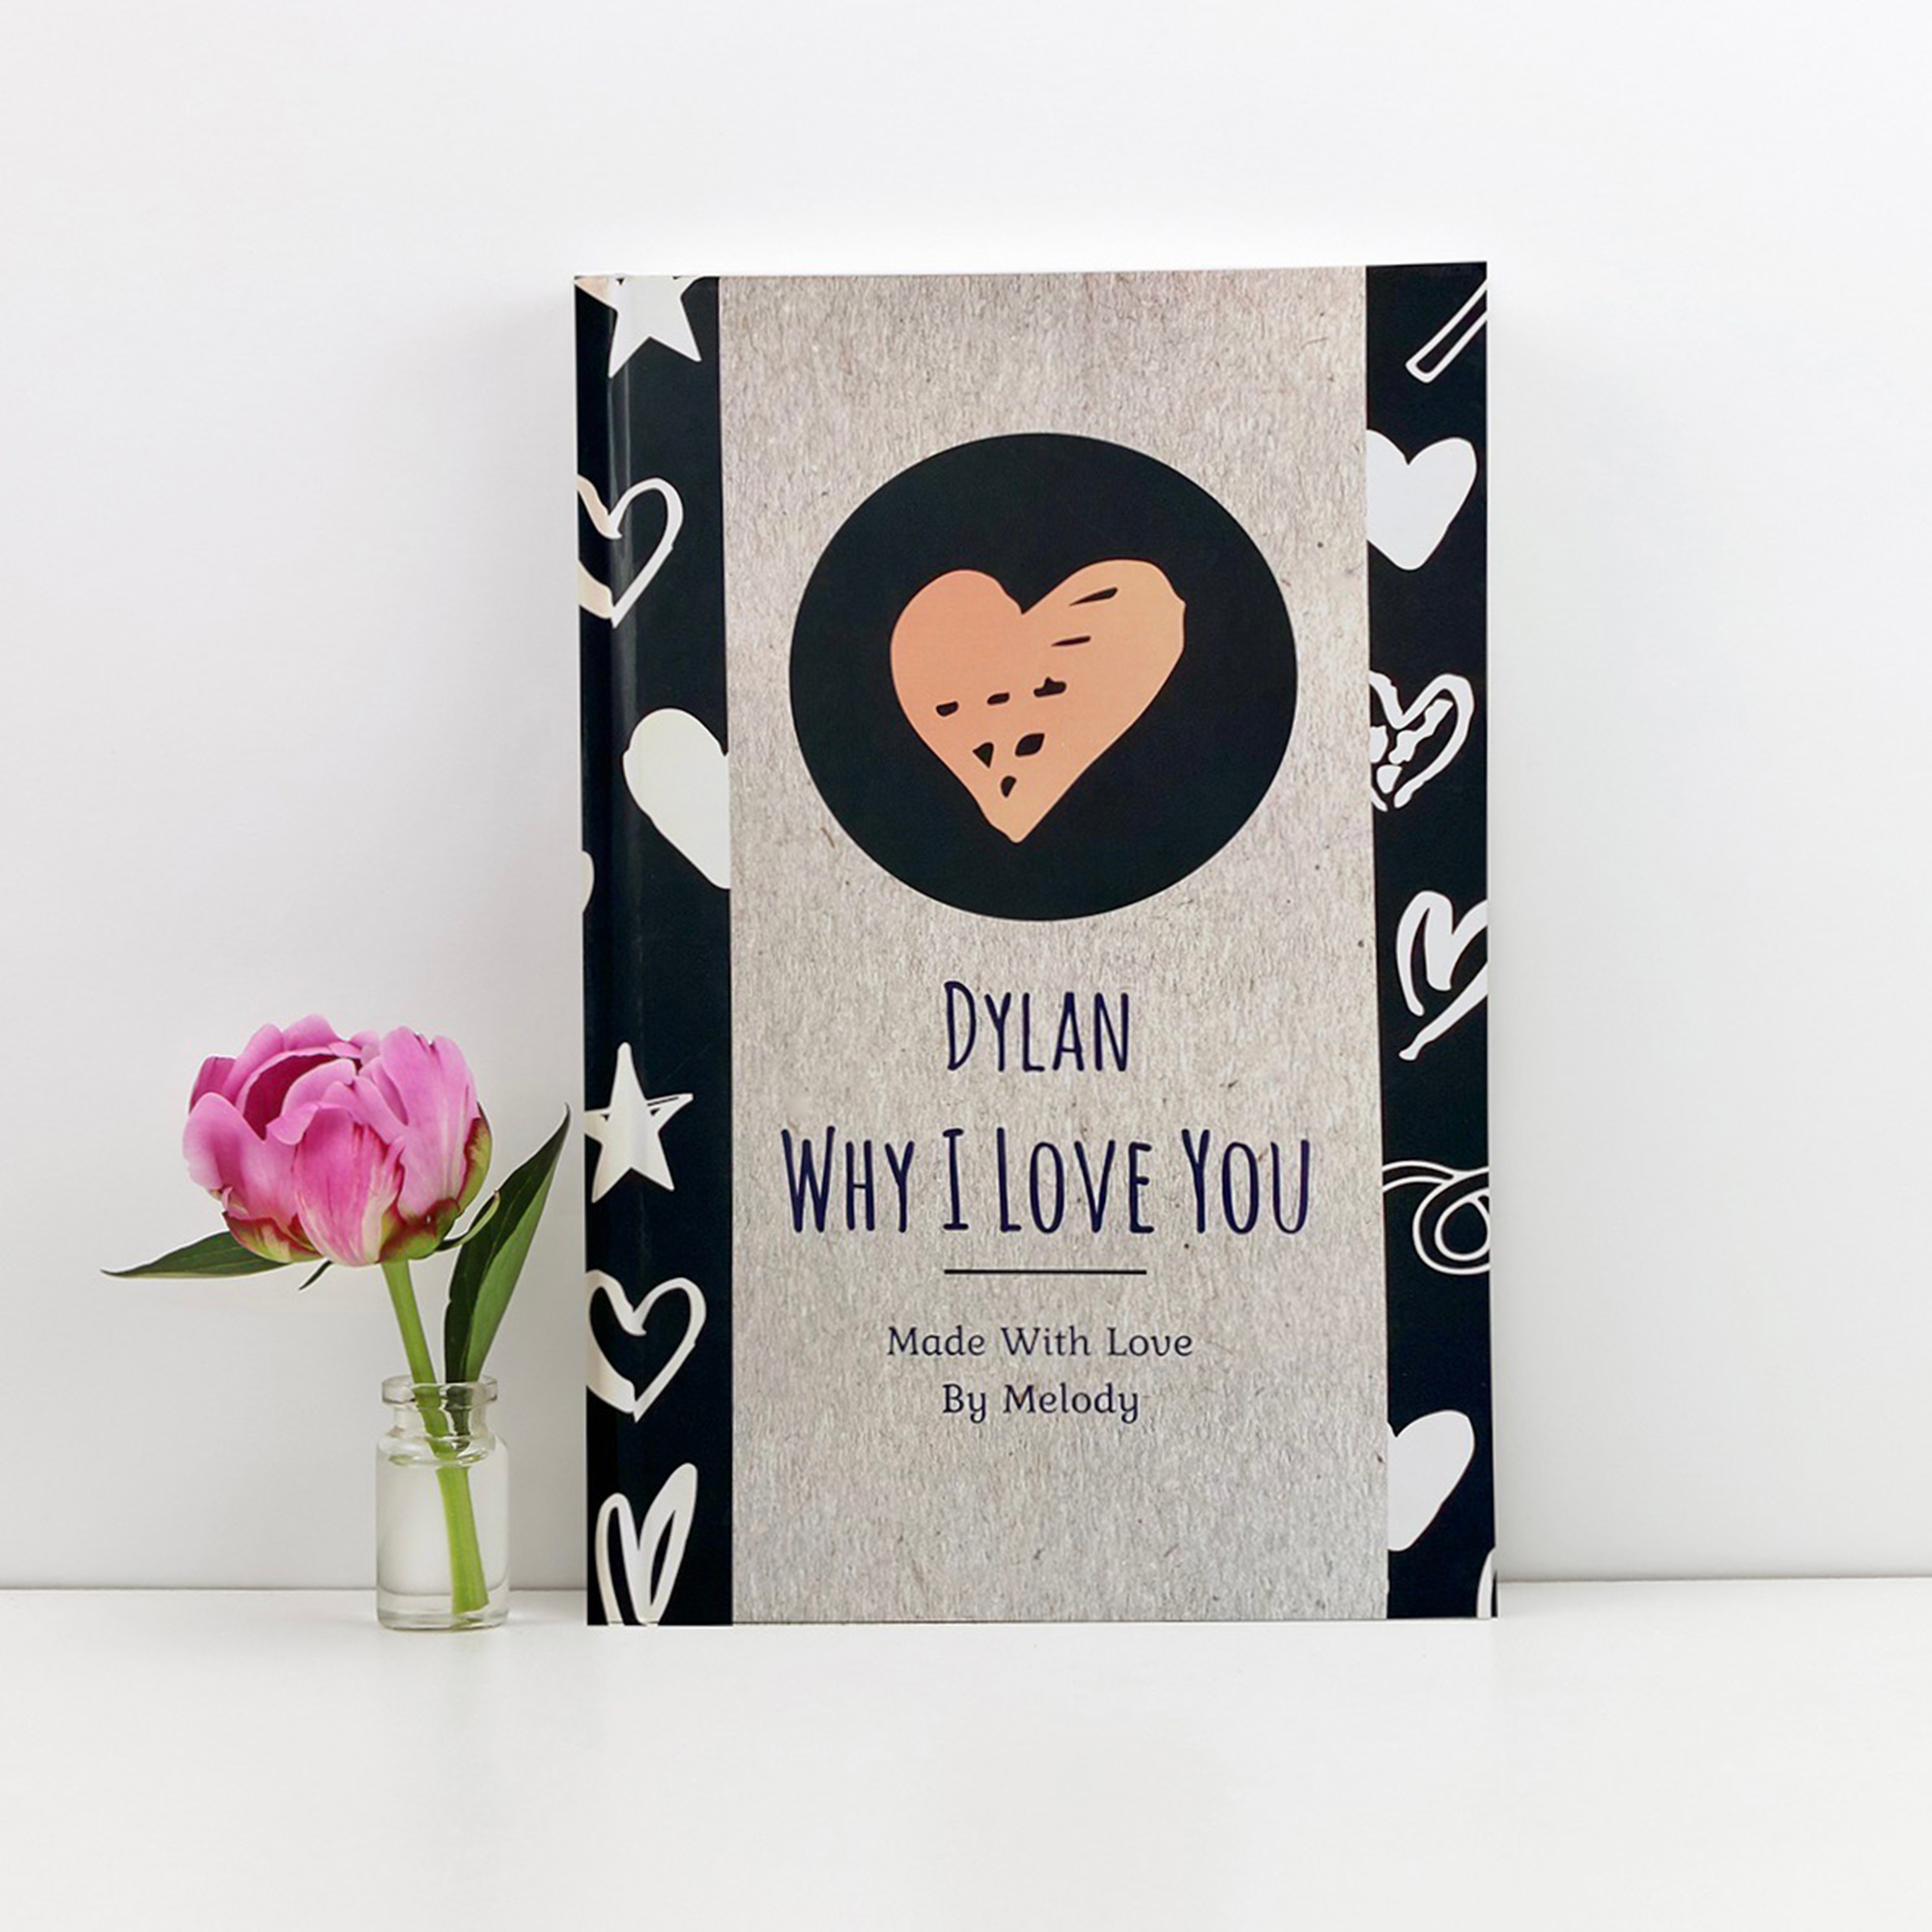 Our First Year Together Book For Anniversary - Luhvee Books